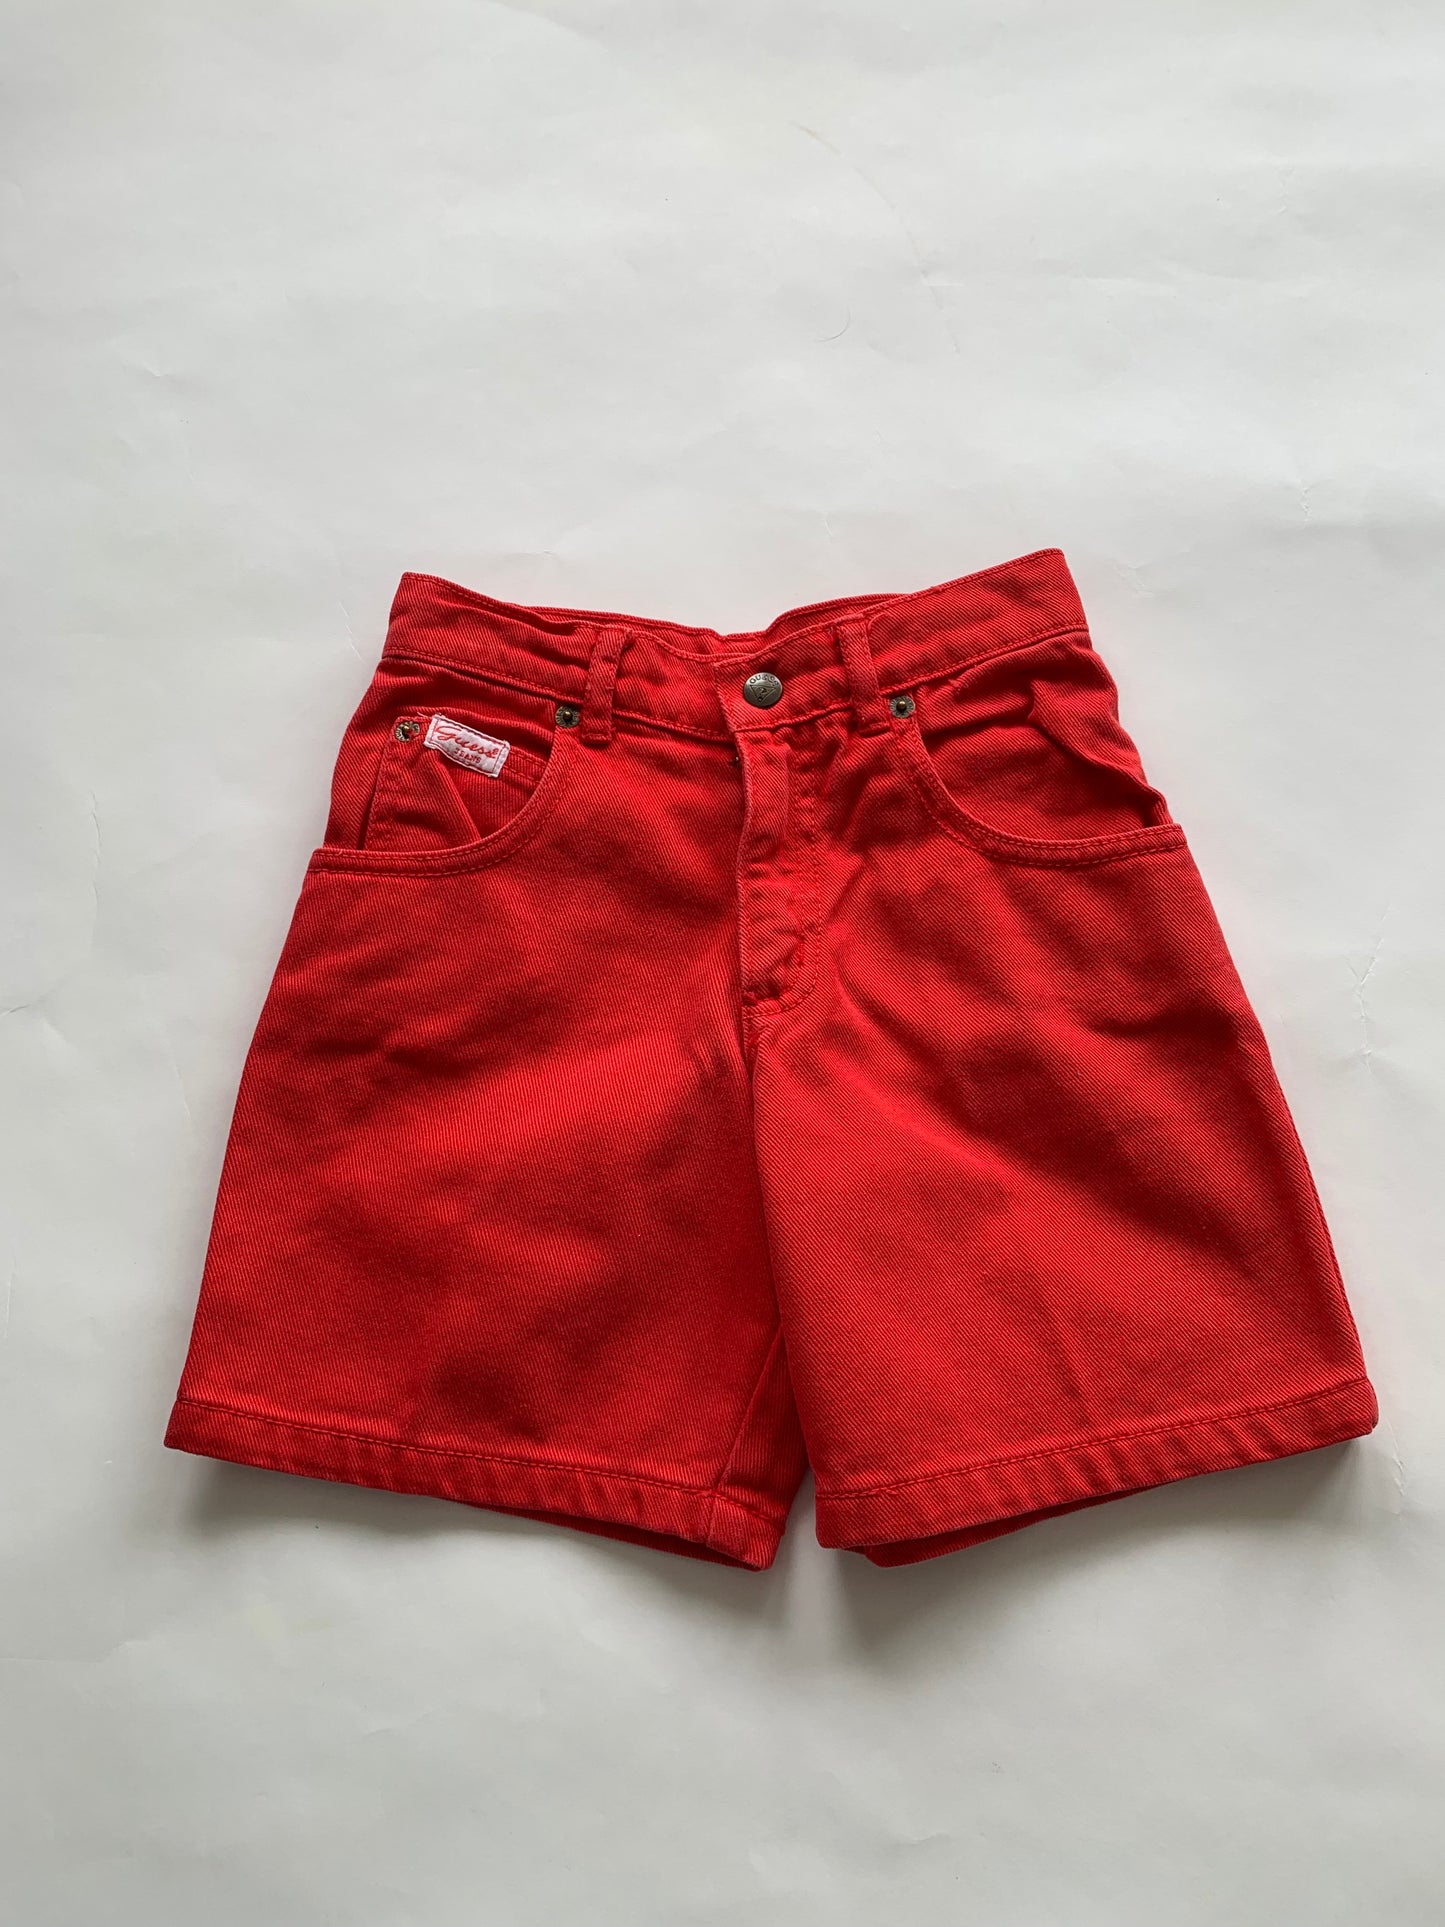 Guess Denim Shorts Made in USA /4-5Y